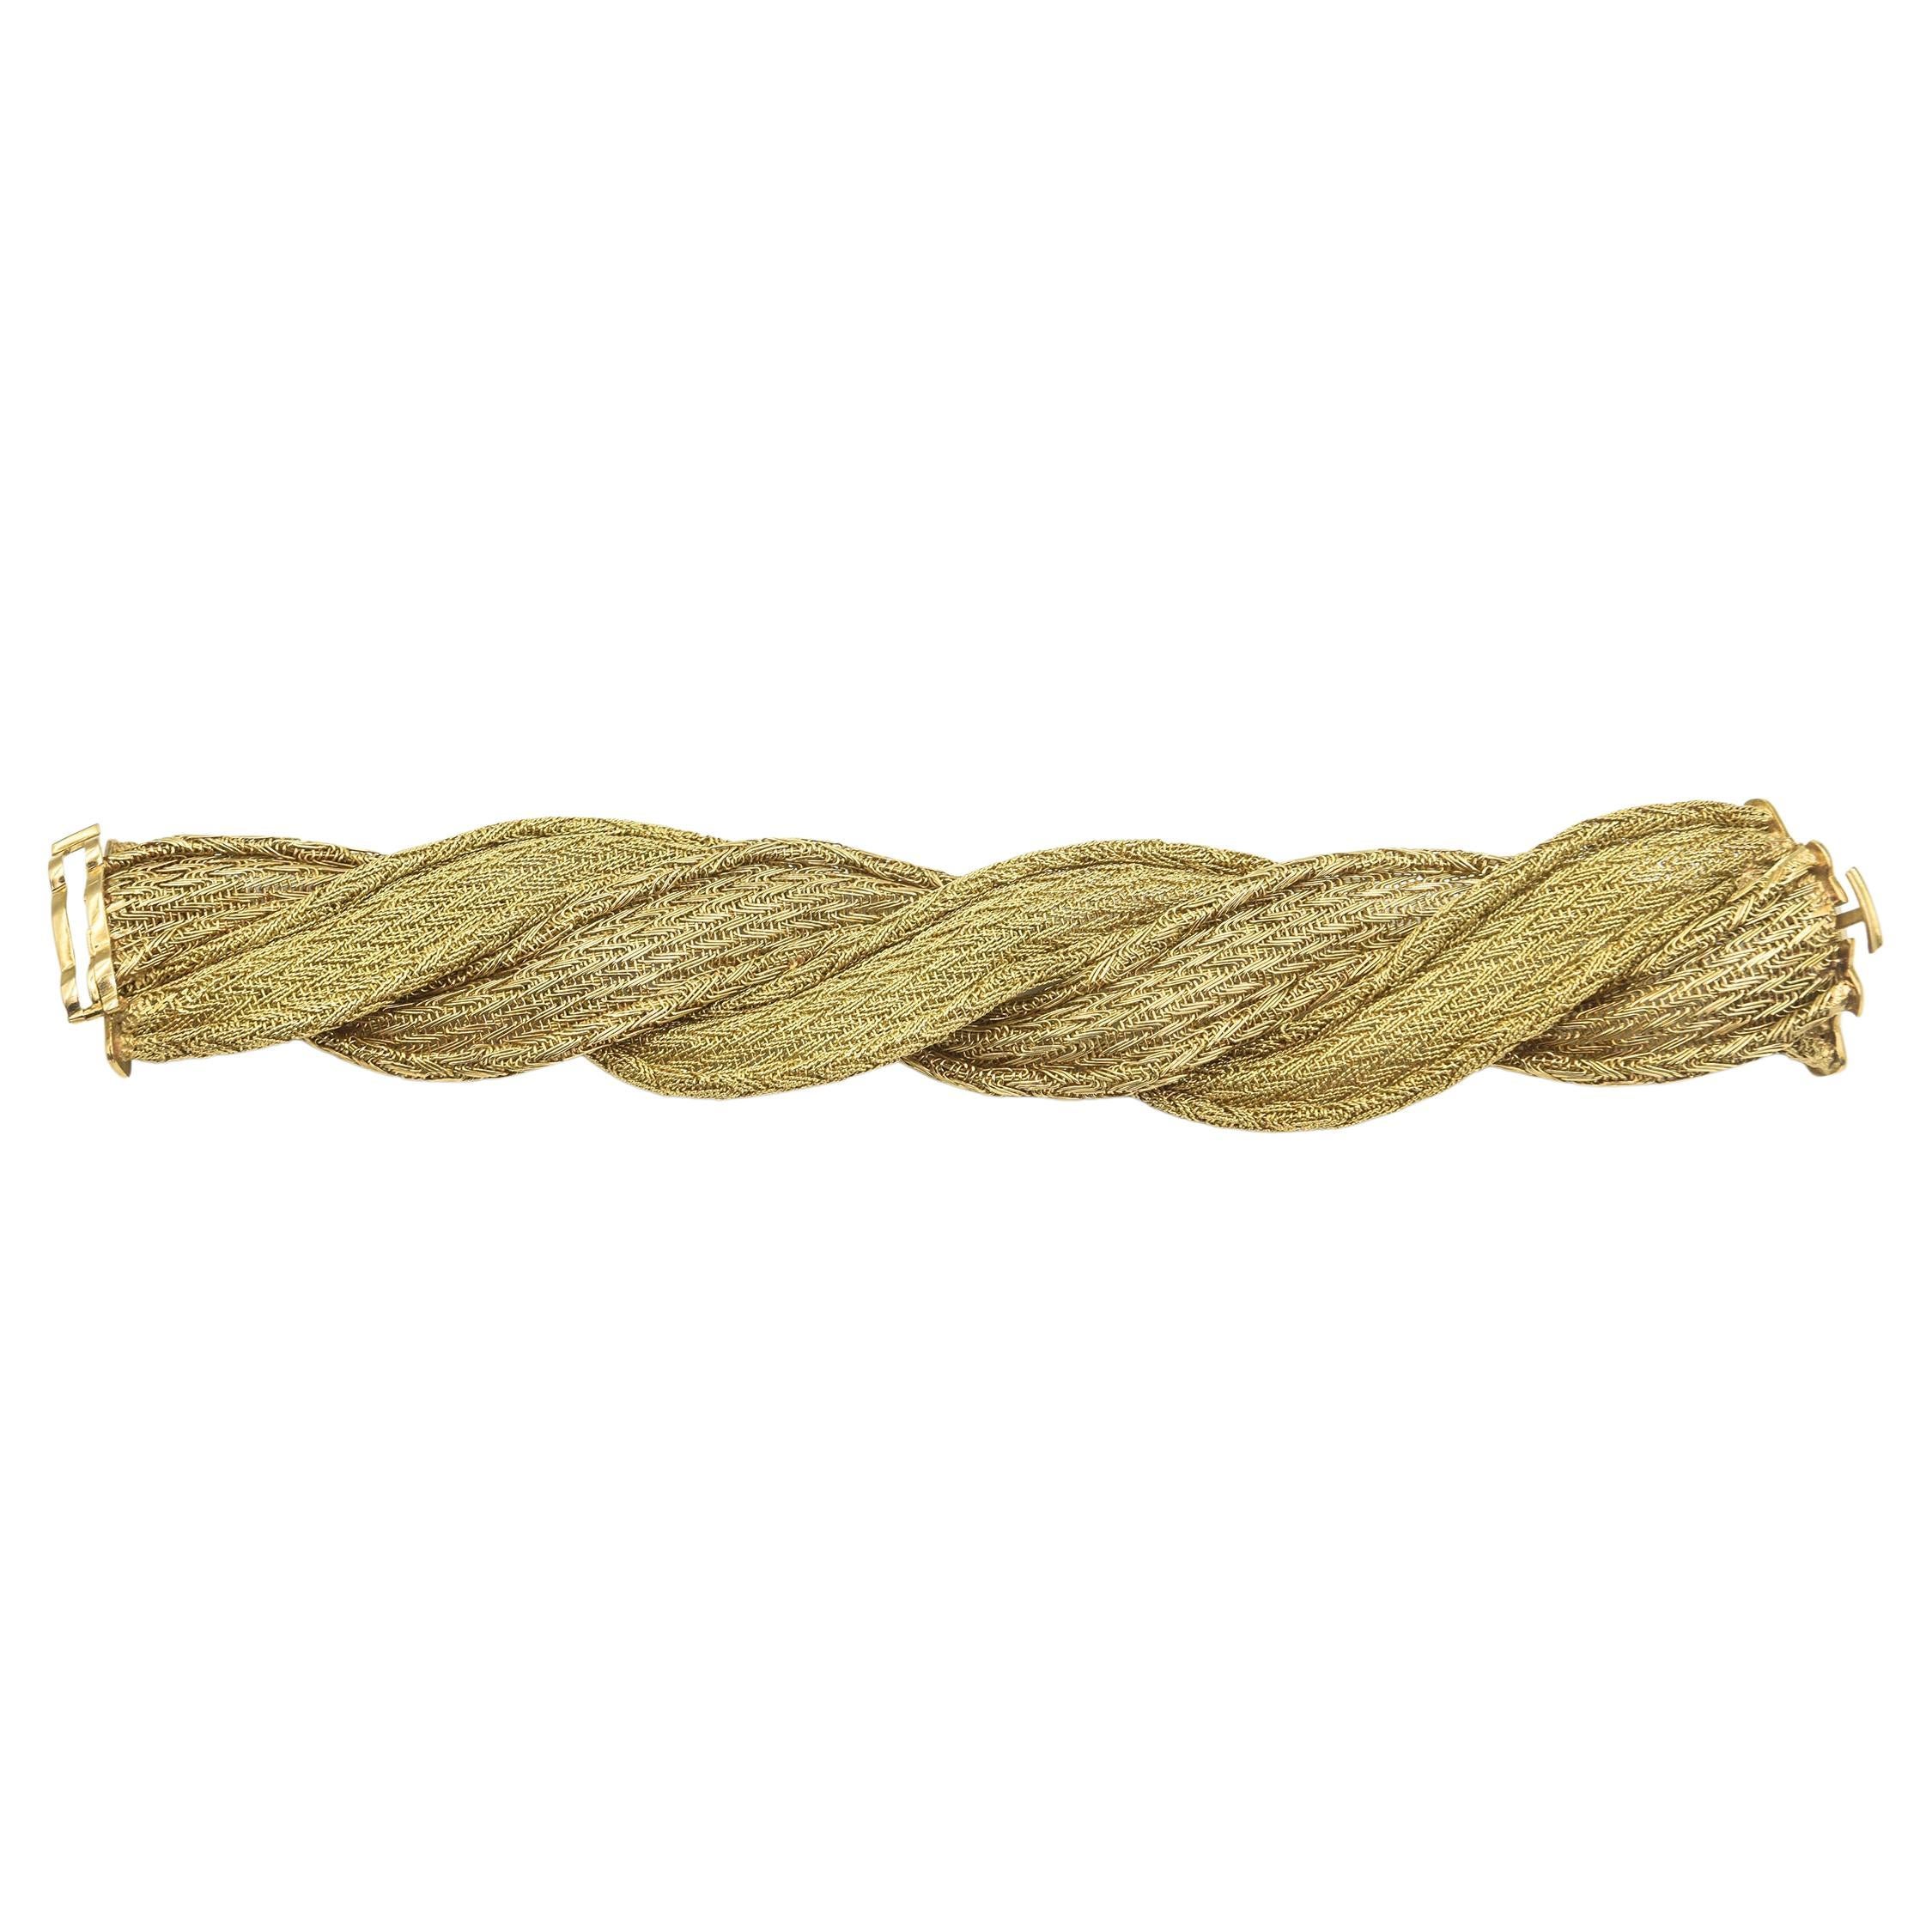 Finely handmade wide woven 18k yellow gold bracelet featuring 2 different types of weave to give it greater dimension.  It is a WOW that feels great on the arm.  It measures approximately 1.25